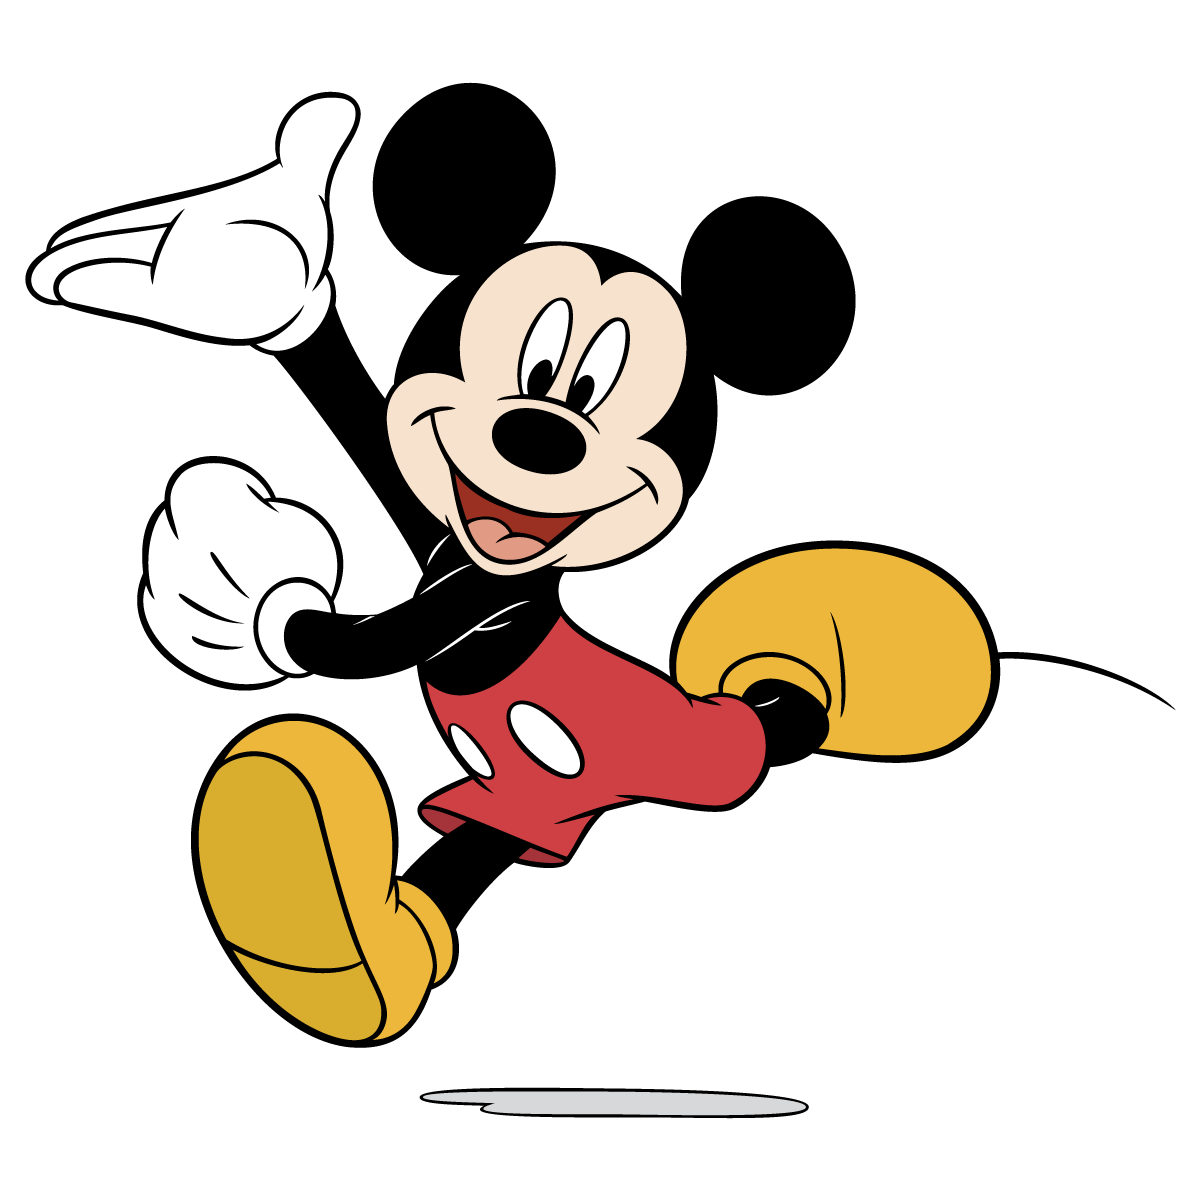 Mickey mouse running.